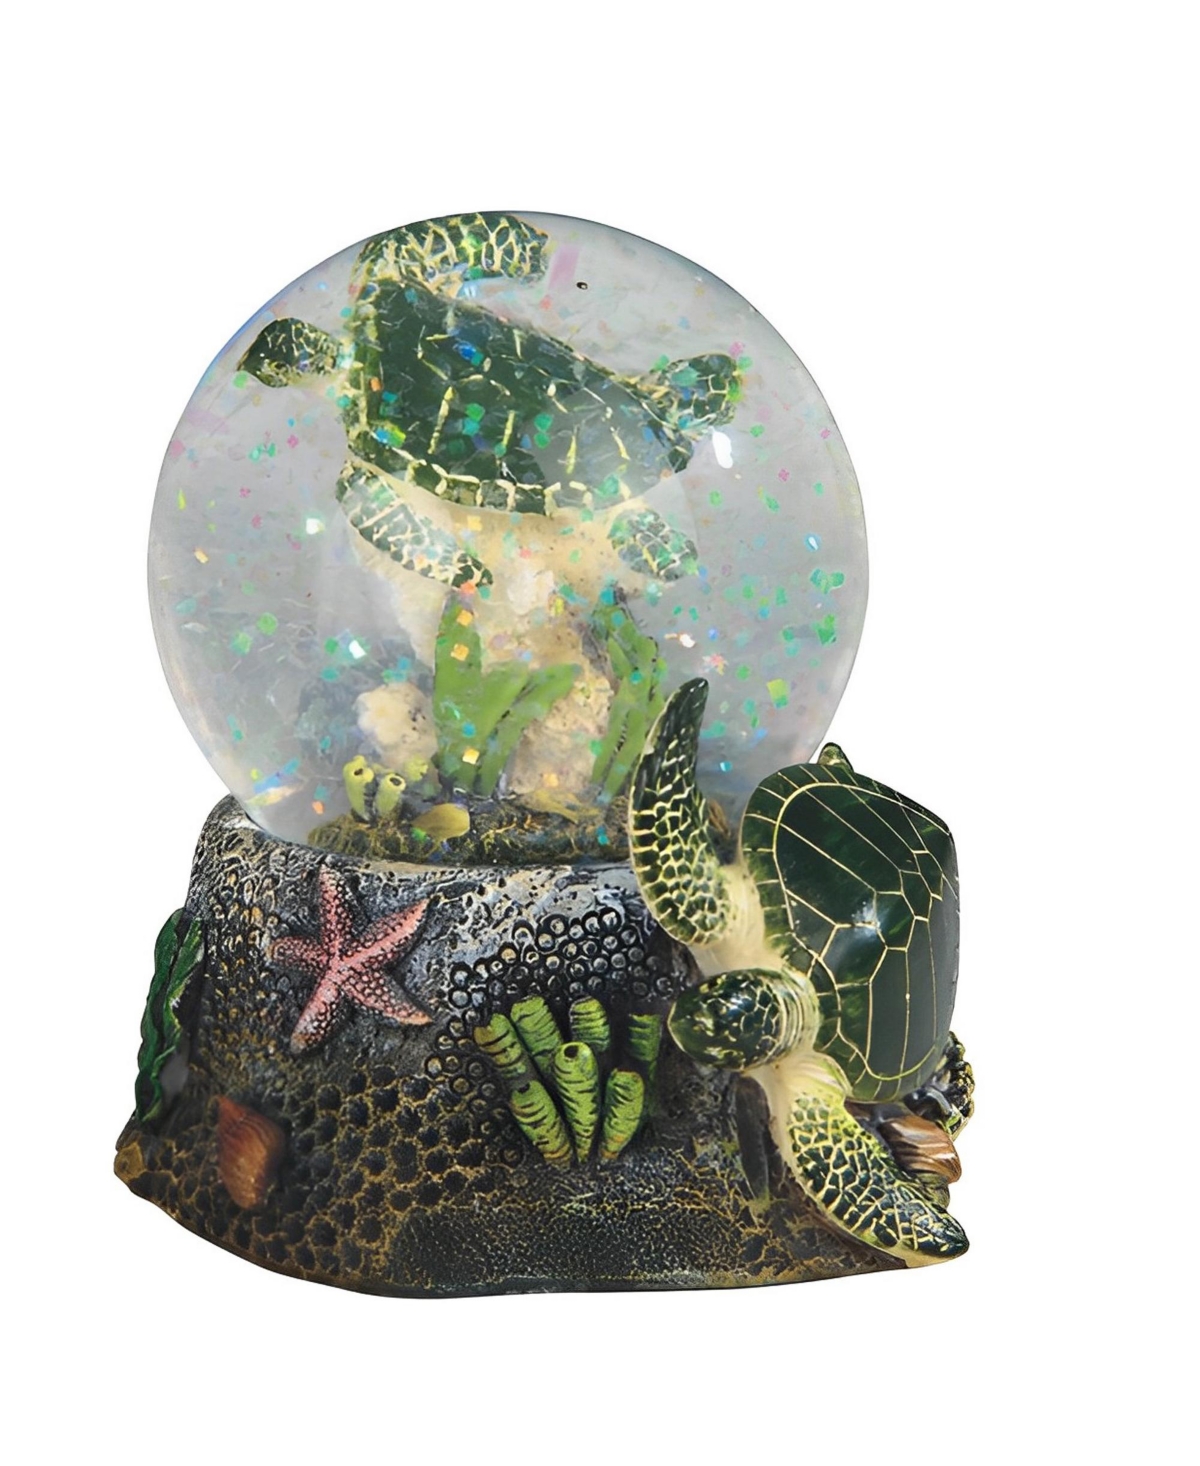 3.75"H Green Sea Turtle Glitter Snow Globe Animal Figurine Home Decor Perfect Gift for House Warming, Holidays and Birthdays - Multicolor